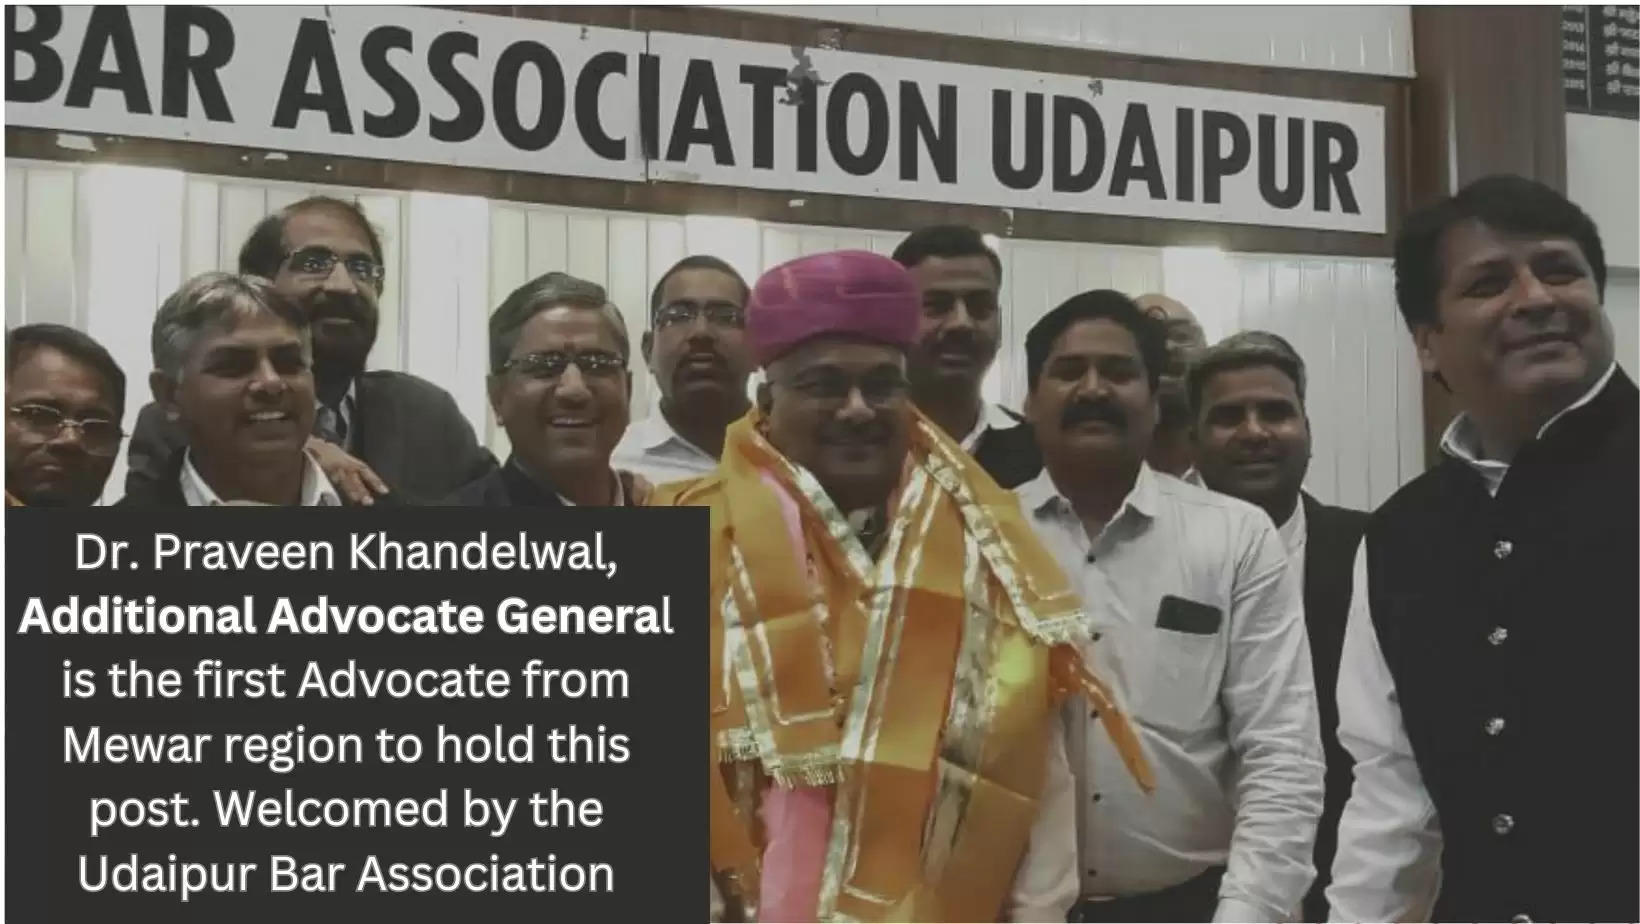 Dr Praveen Khandelwal is the First Additional Advocate General from the Mewar Belt